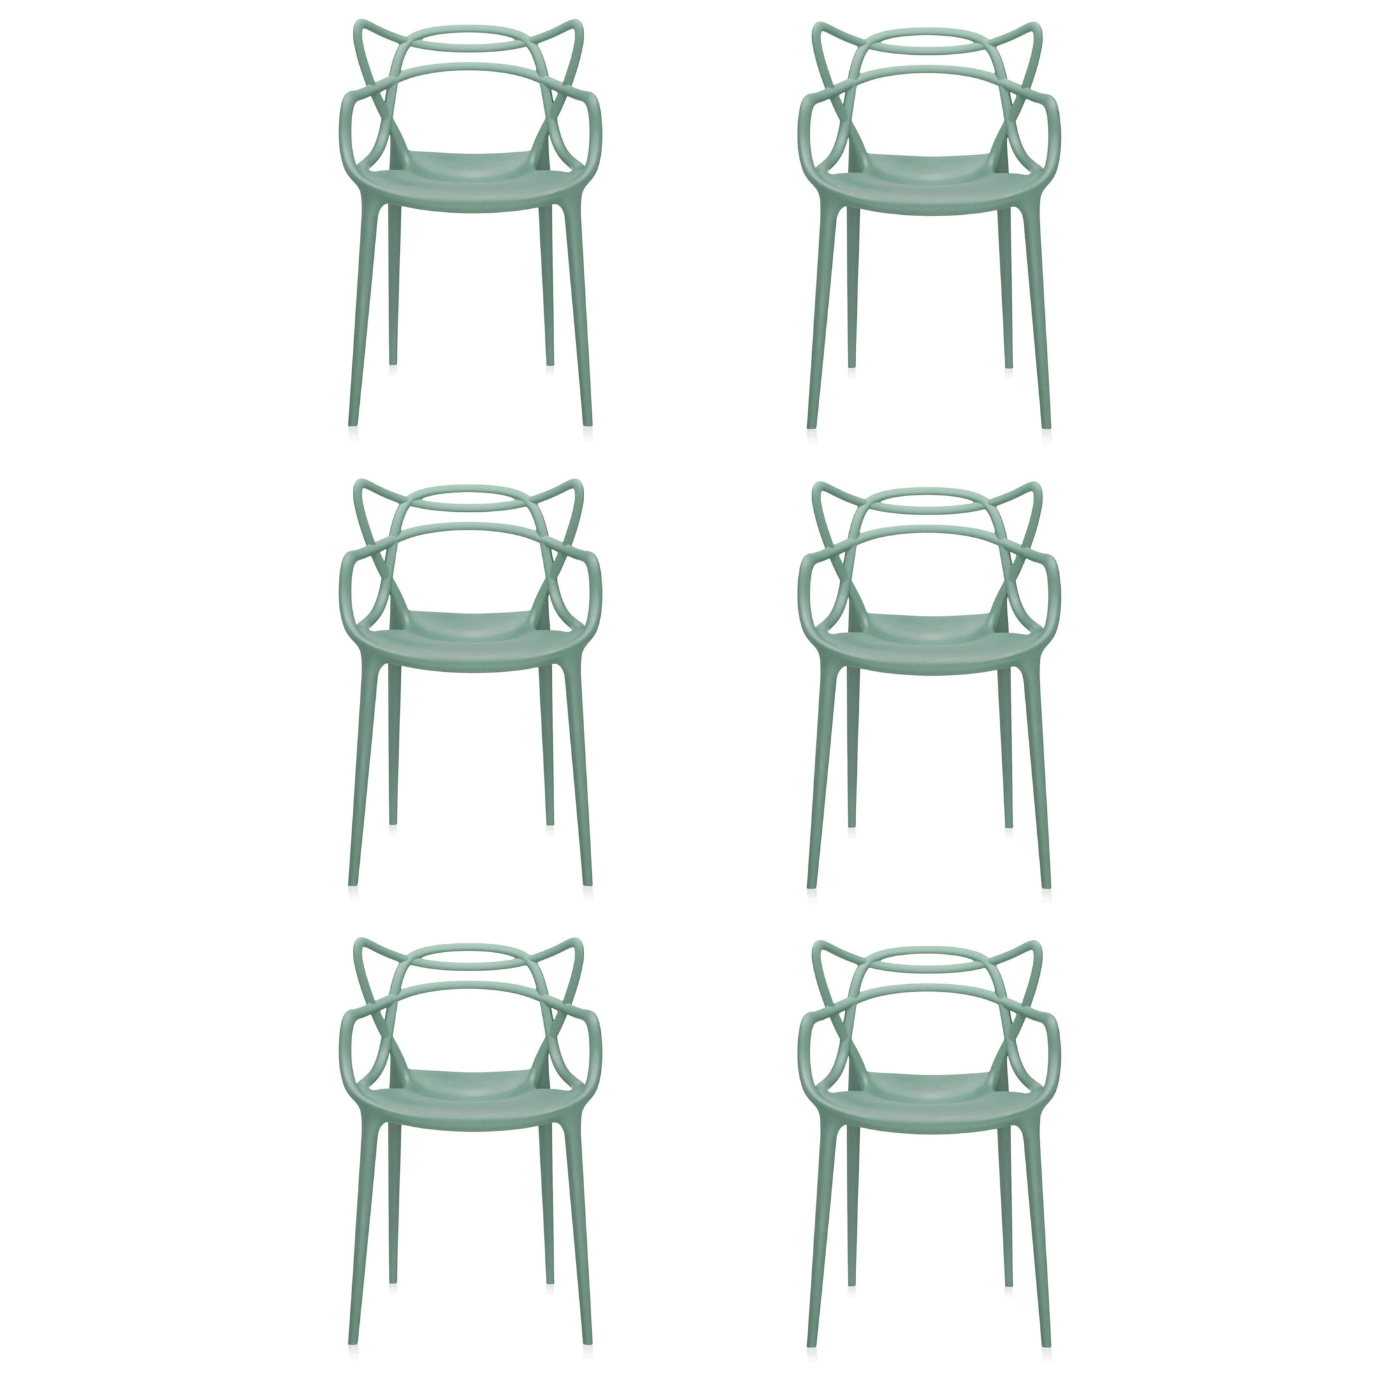 Kartell Masters Dining Chair Bundle Set Of 6 Chairs Sage Green Designer Furniture From Holloways Of Ludlow